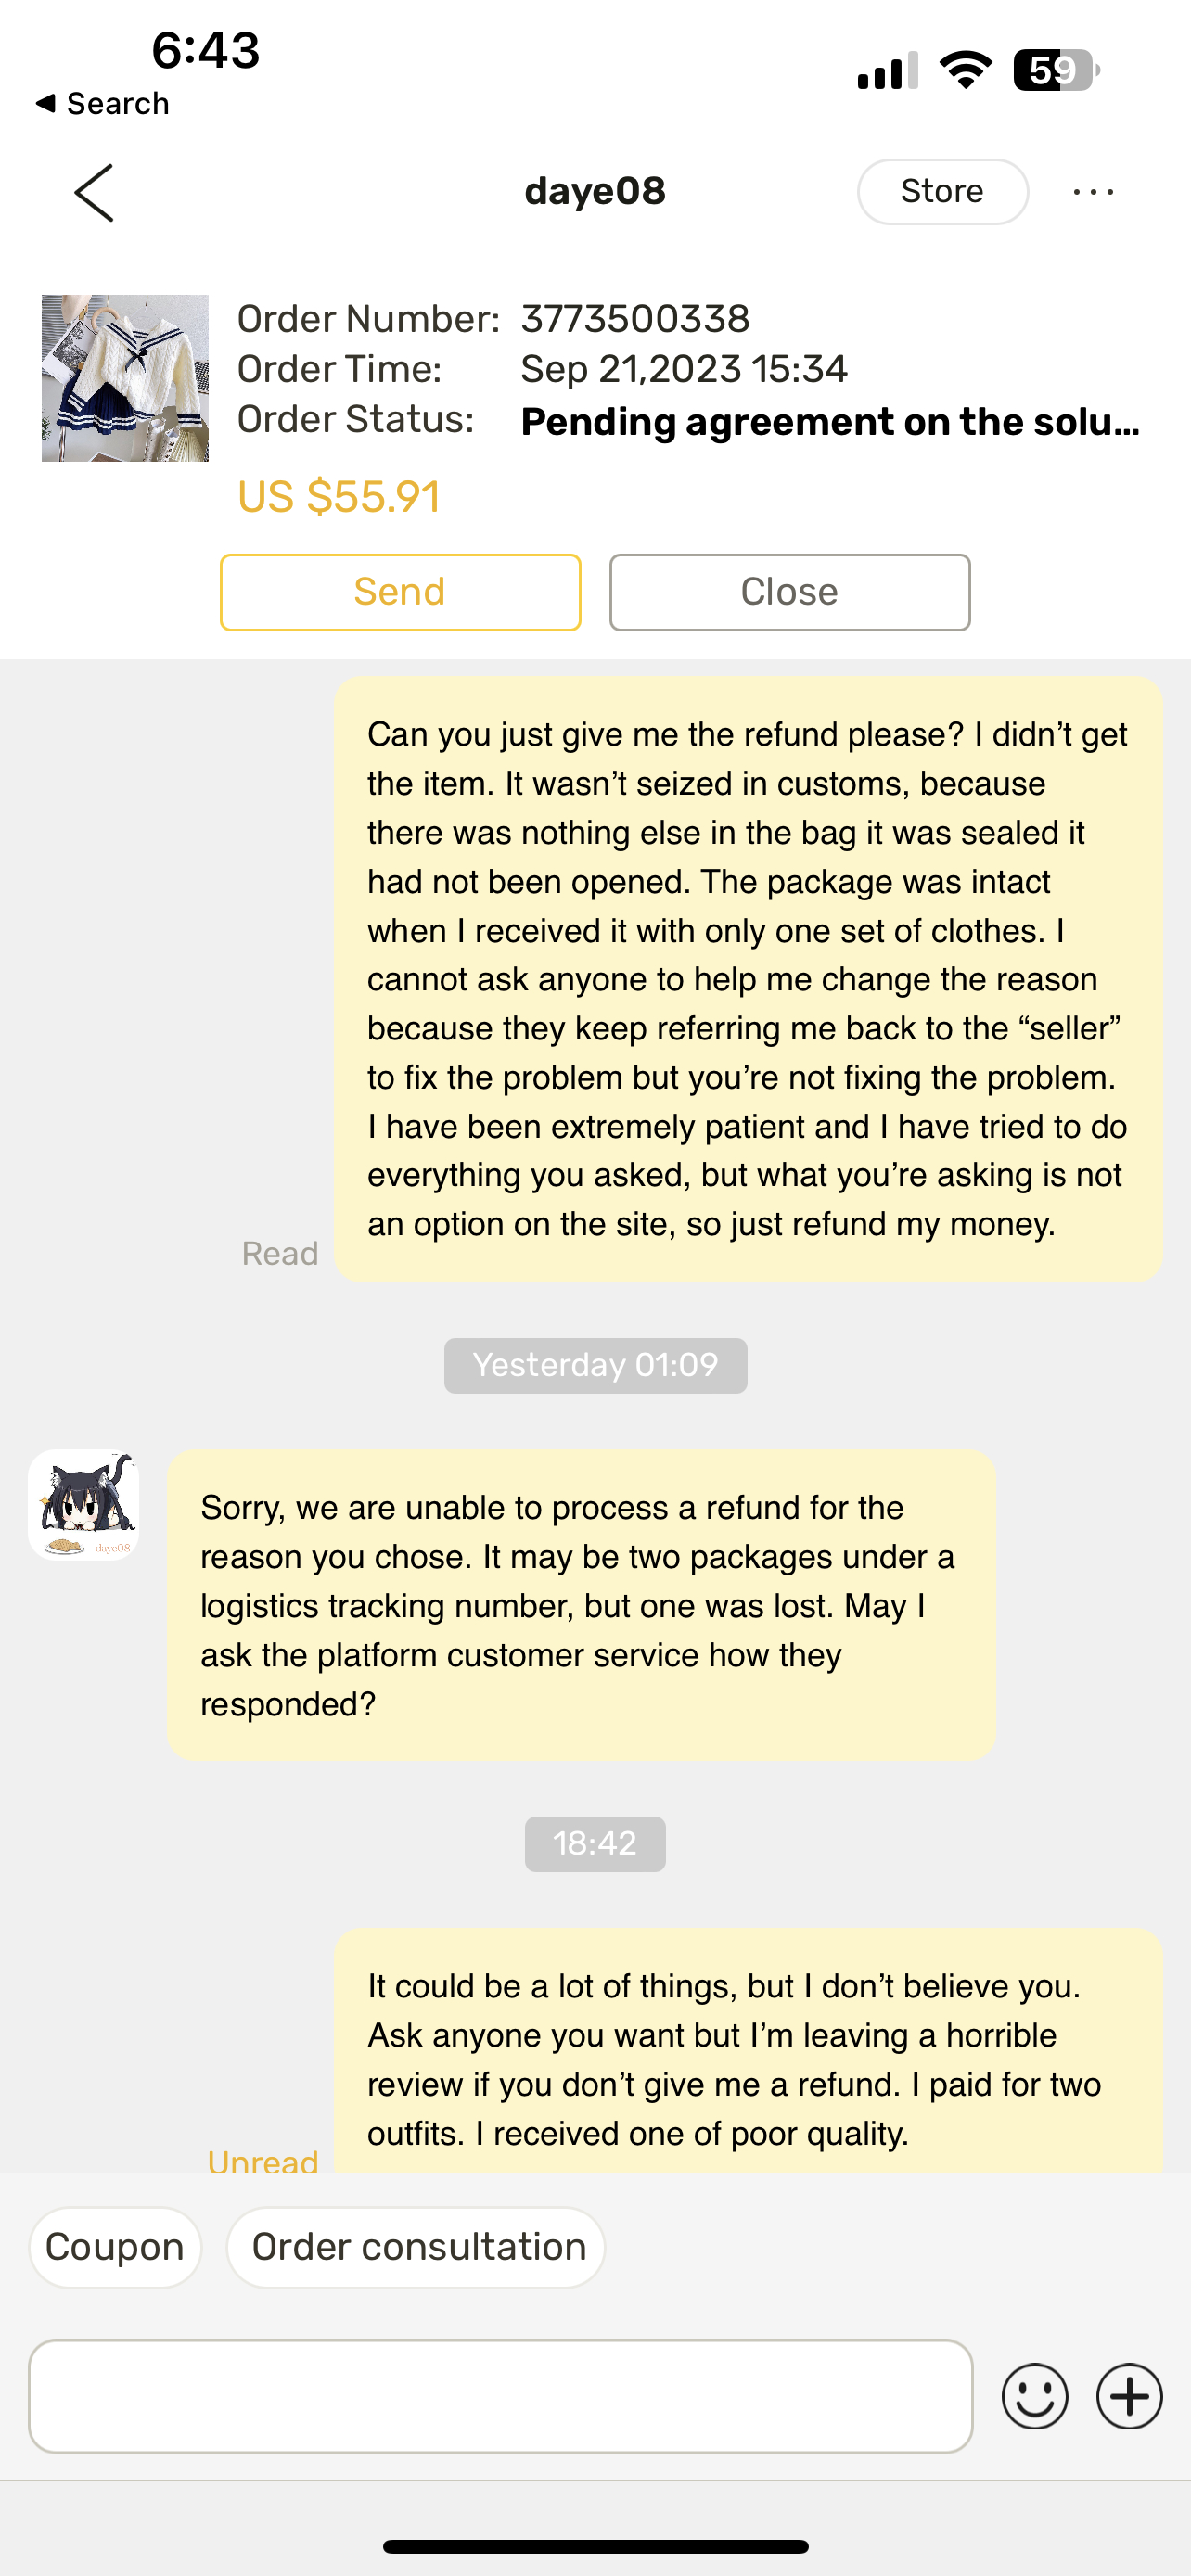 Is DHGate Legit And Safe? Read This To Avoid The Scams